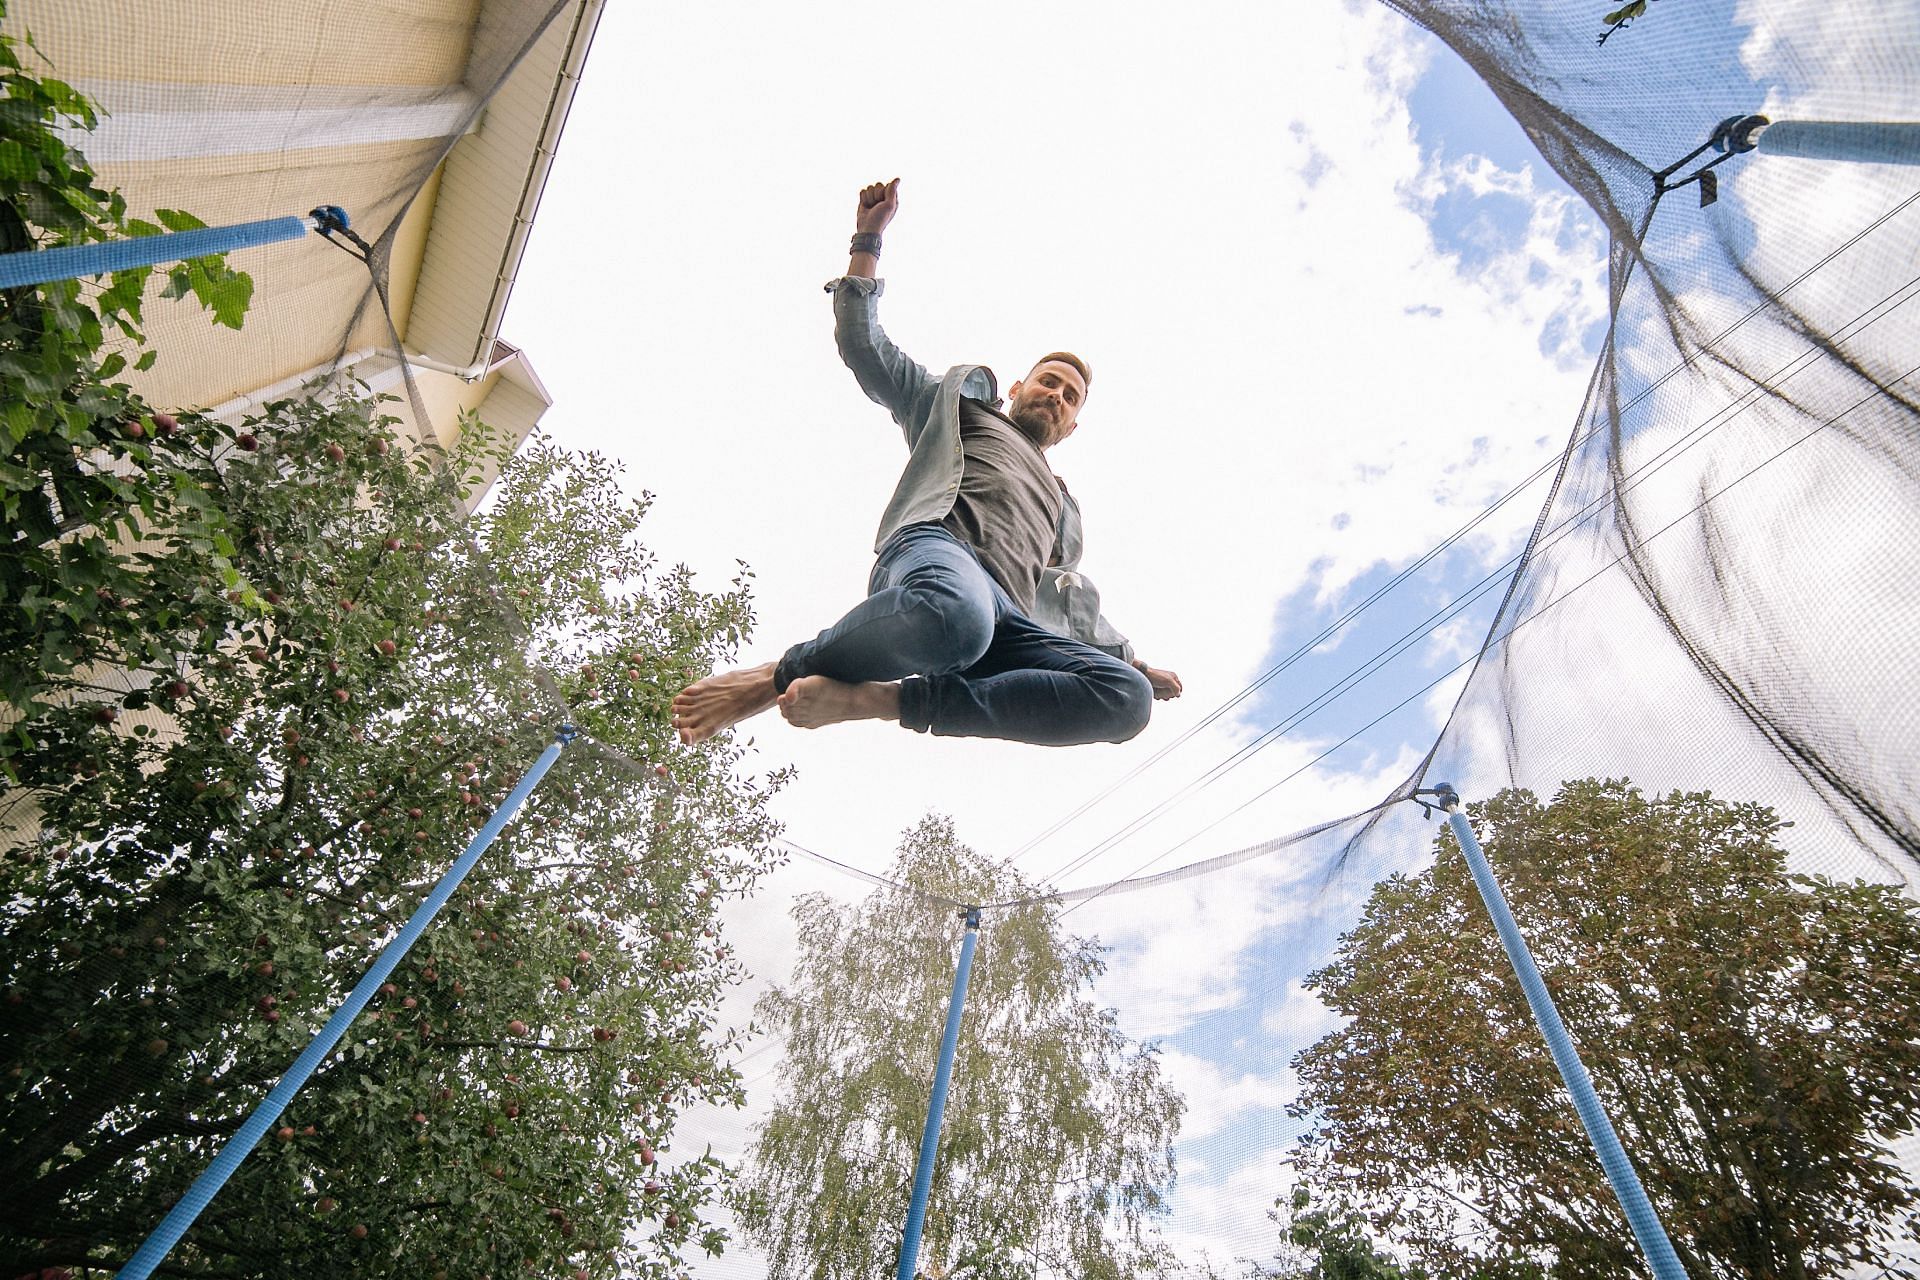 You can start off by doing some low intensity jumping on the trampoline to get used to the jumping sensation (Image via Pexels @Yan Krukau)